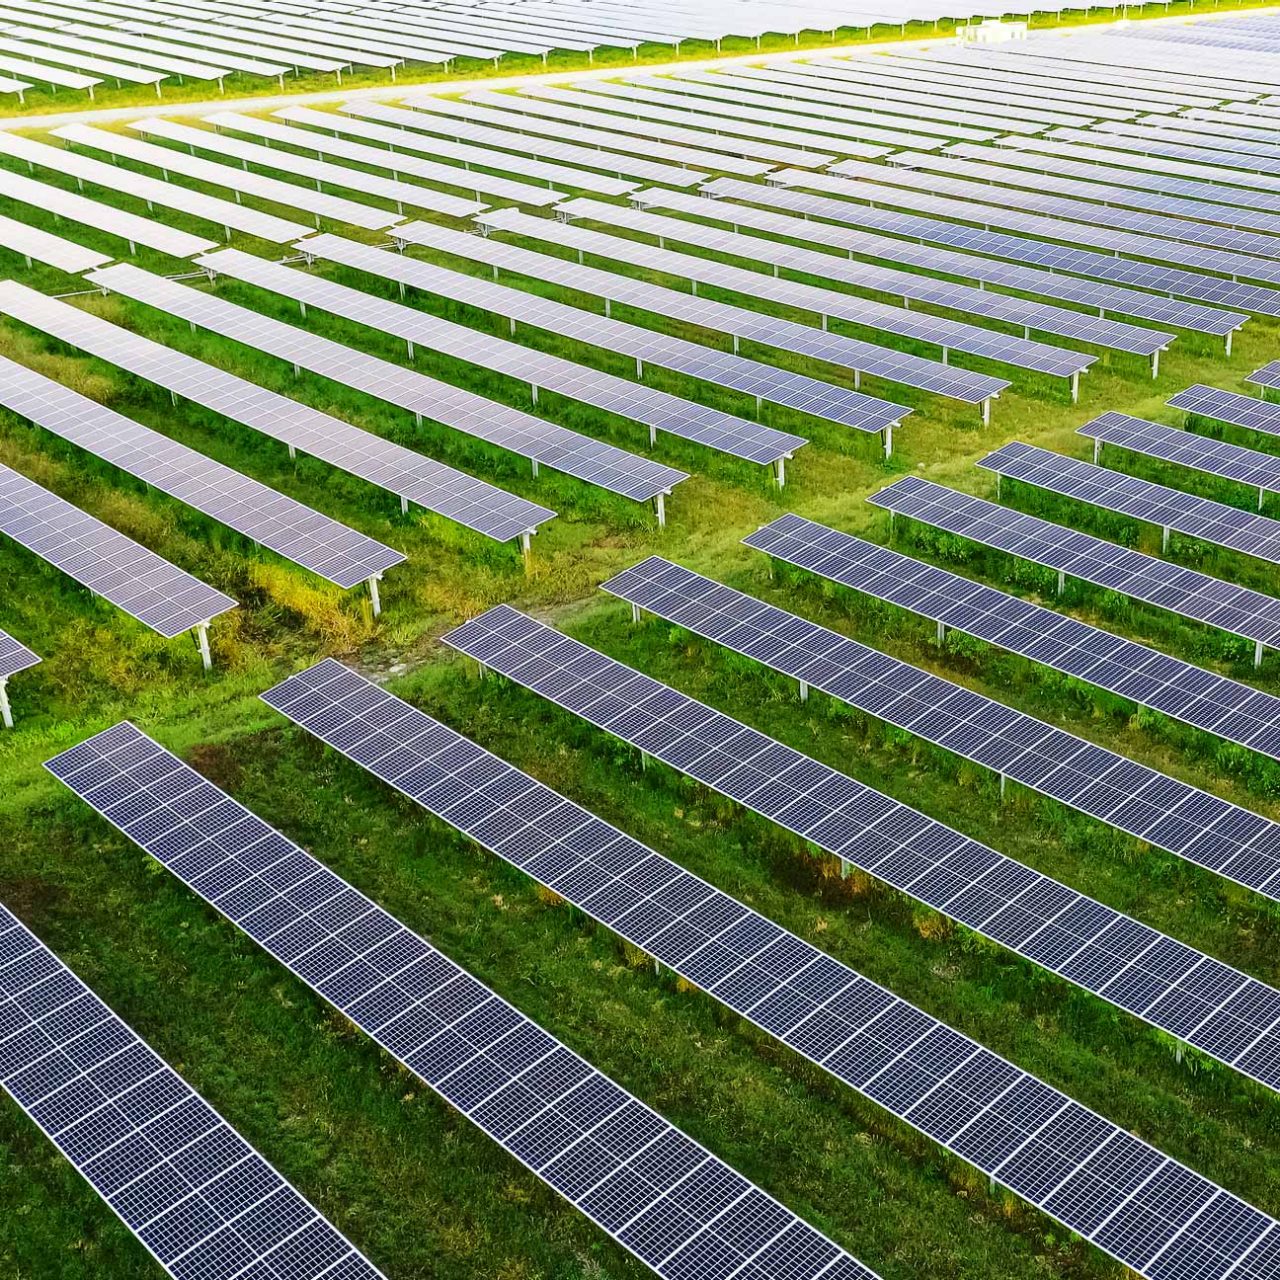 Image of solar panels in a field 